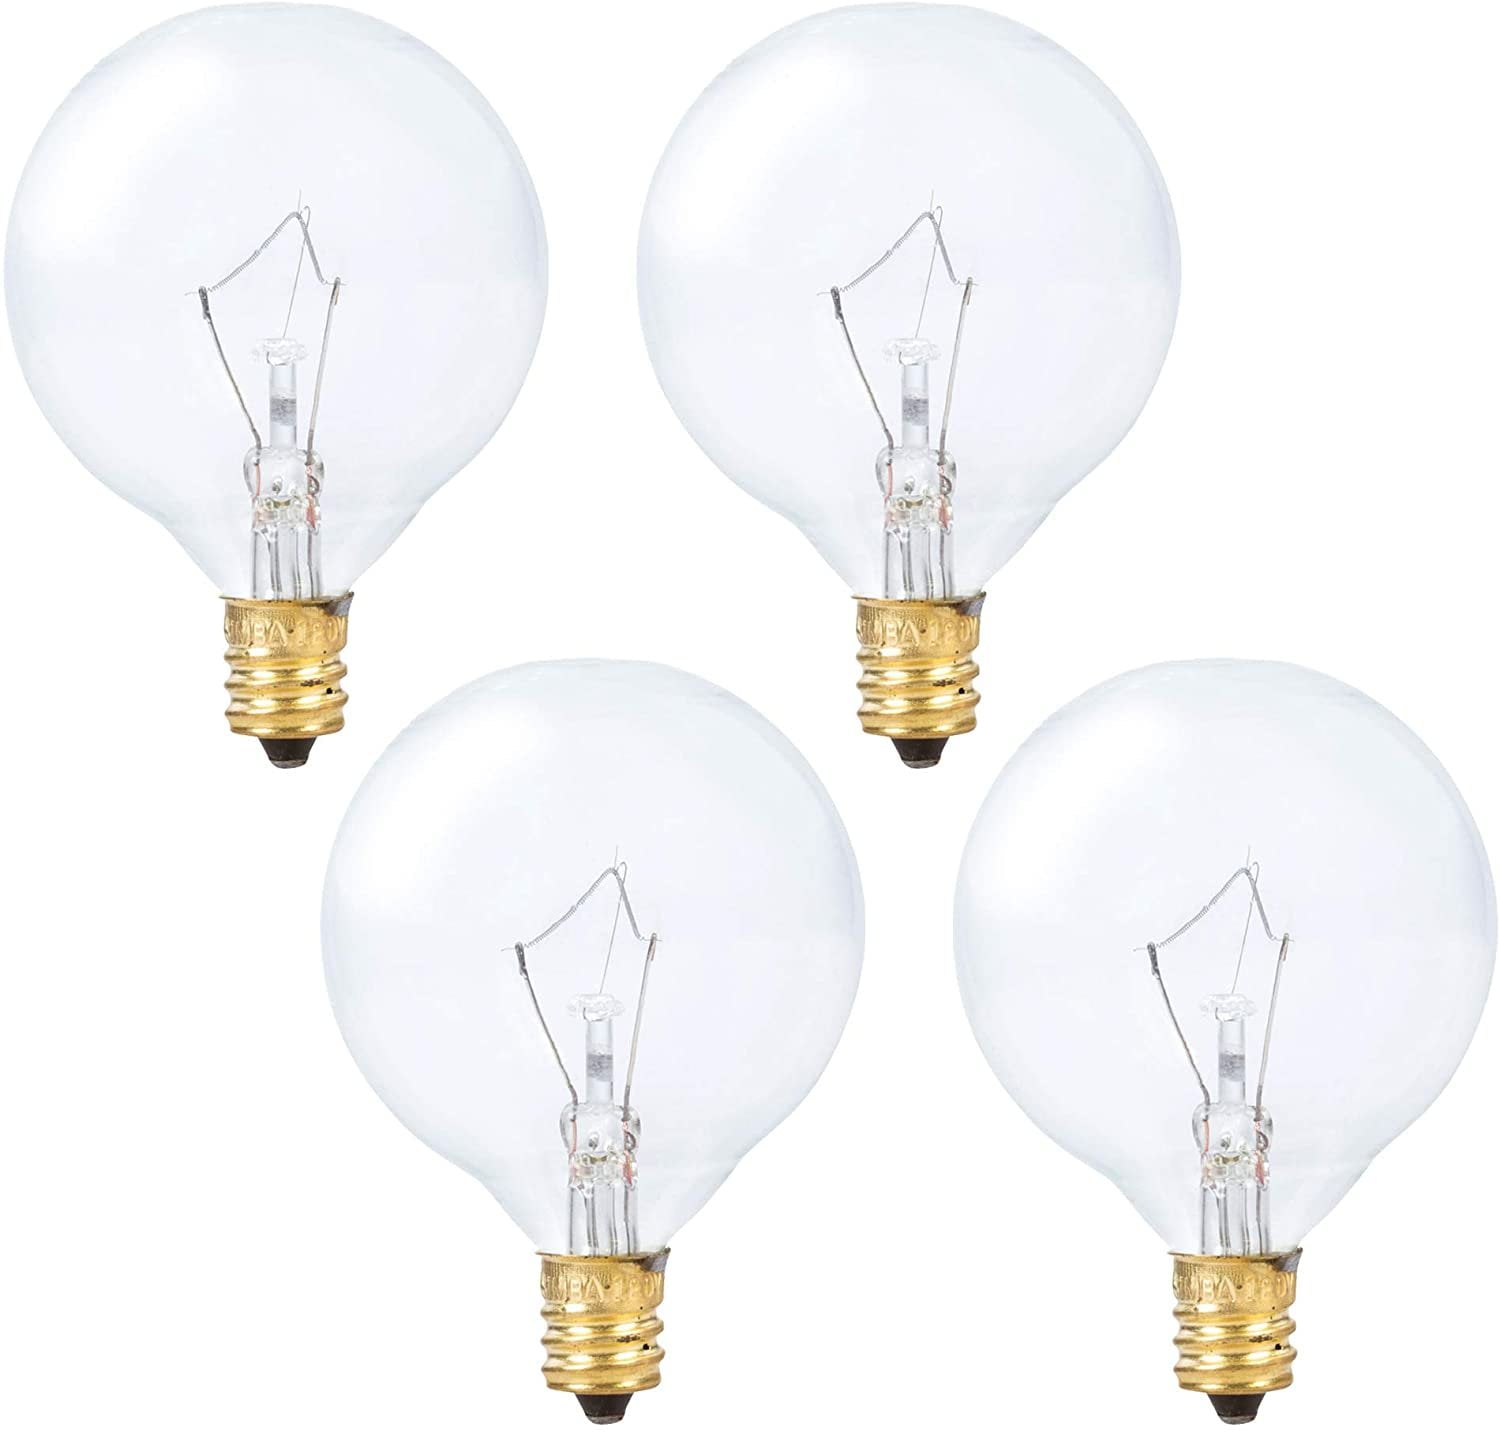 Clear Glass 110V 120V for Chandelier Simba Lighting Small Globe G16.5 Round Bulb 25W E12 Candelabra Base Sconce Scentsy Wax Warmer 10 Pack Decorative Vanity Lights 2700K Warm White Ceiling Fan 